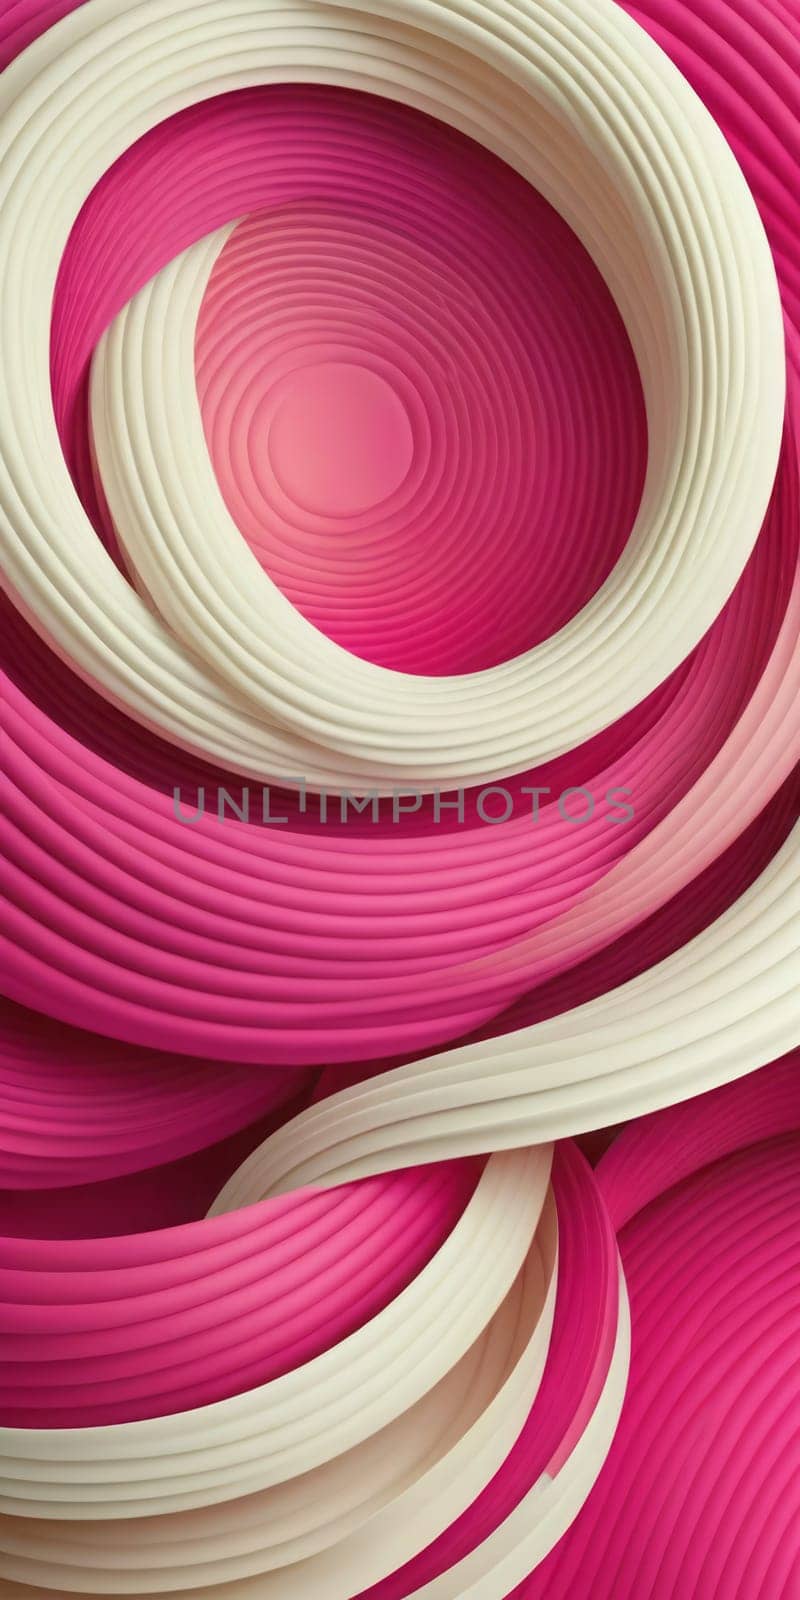 Coiled Shapes in Fuchsia and White by nkotlyar